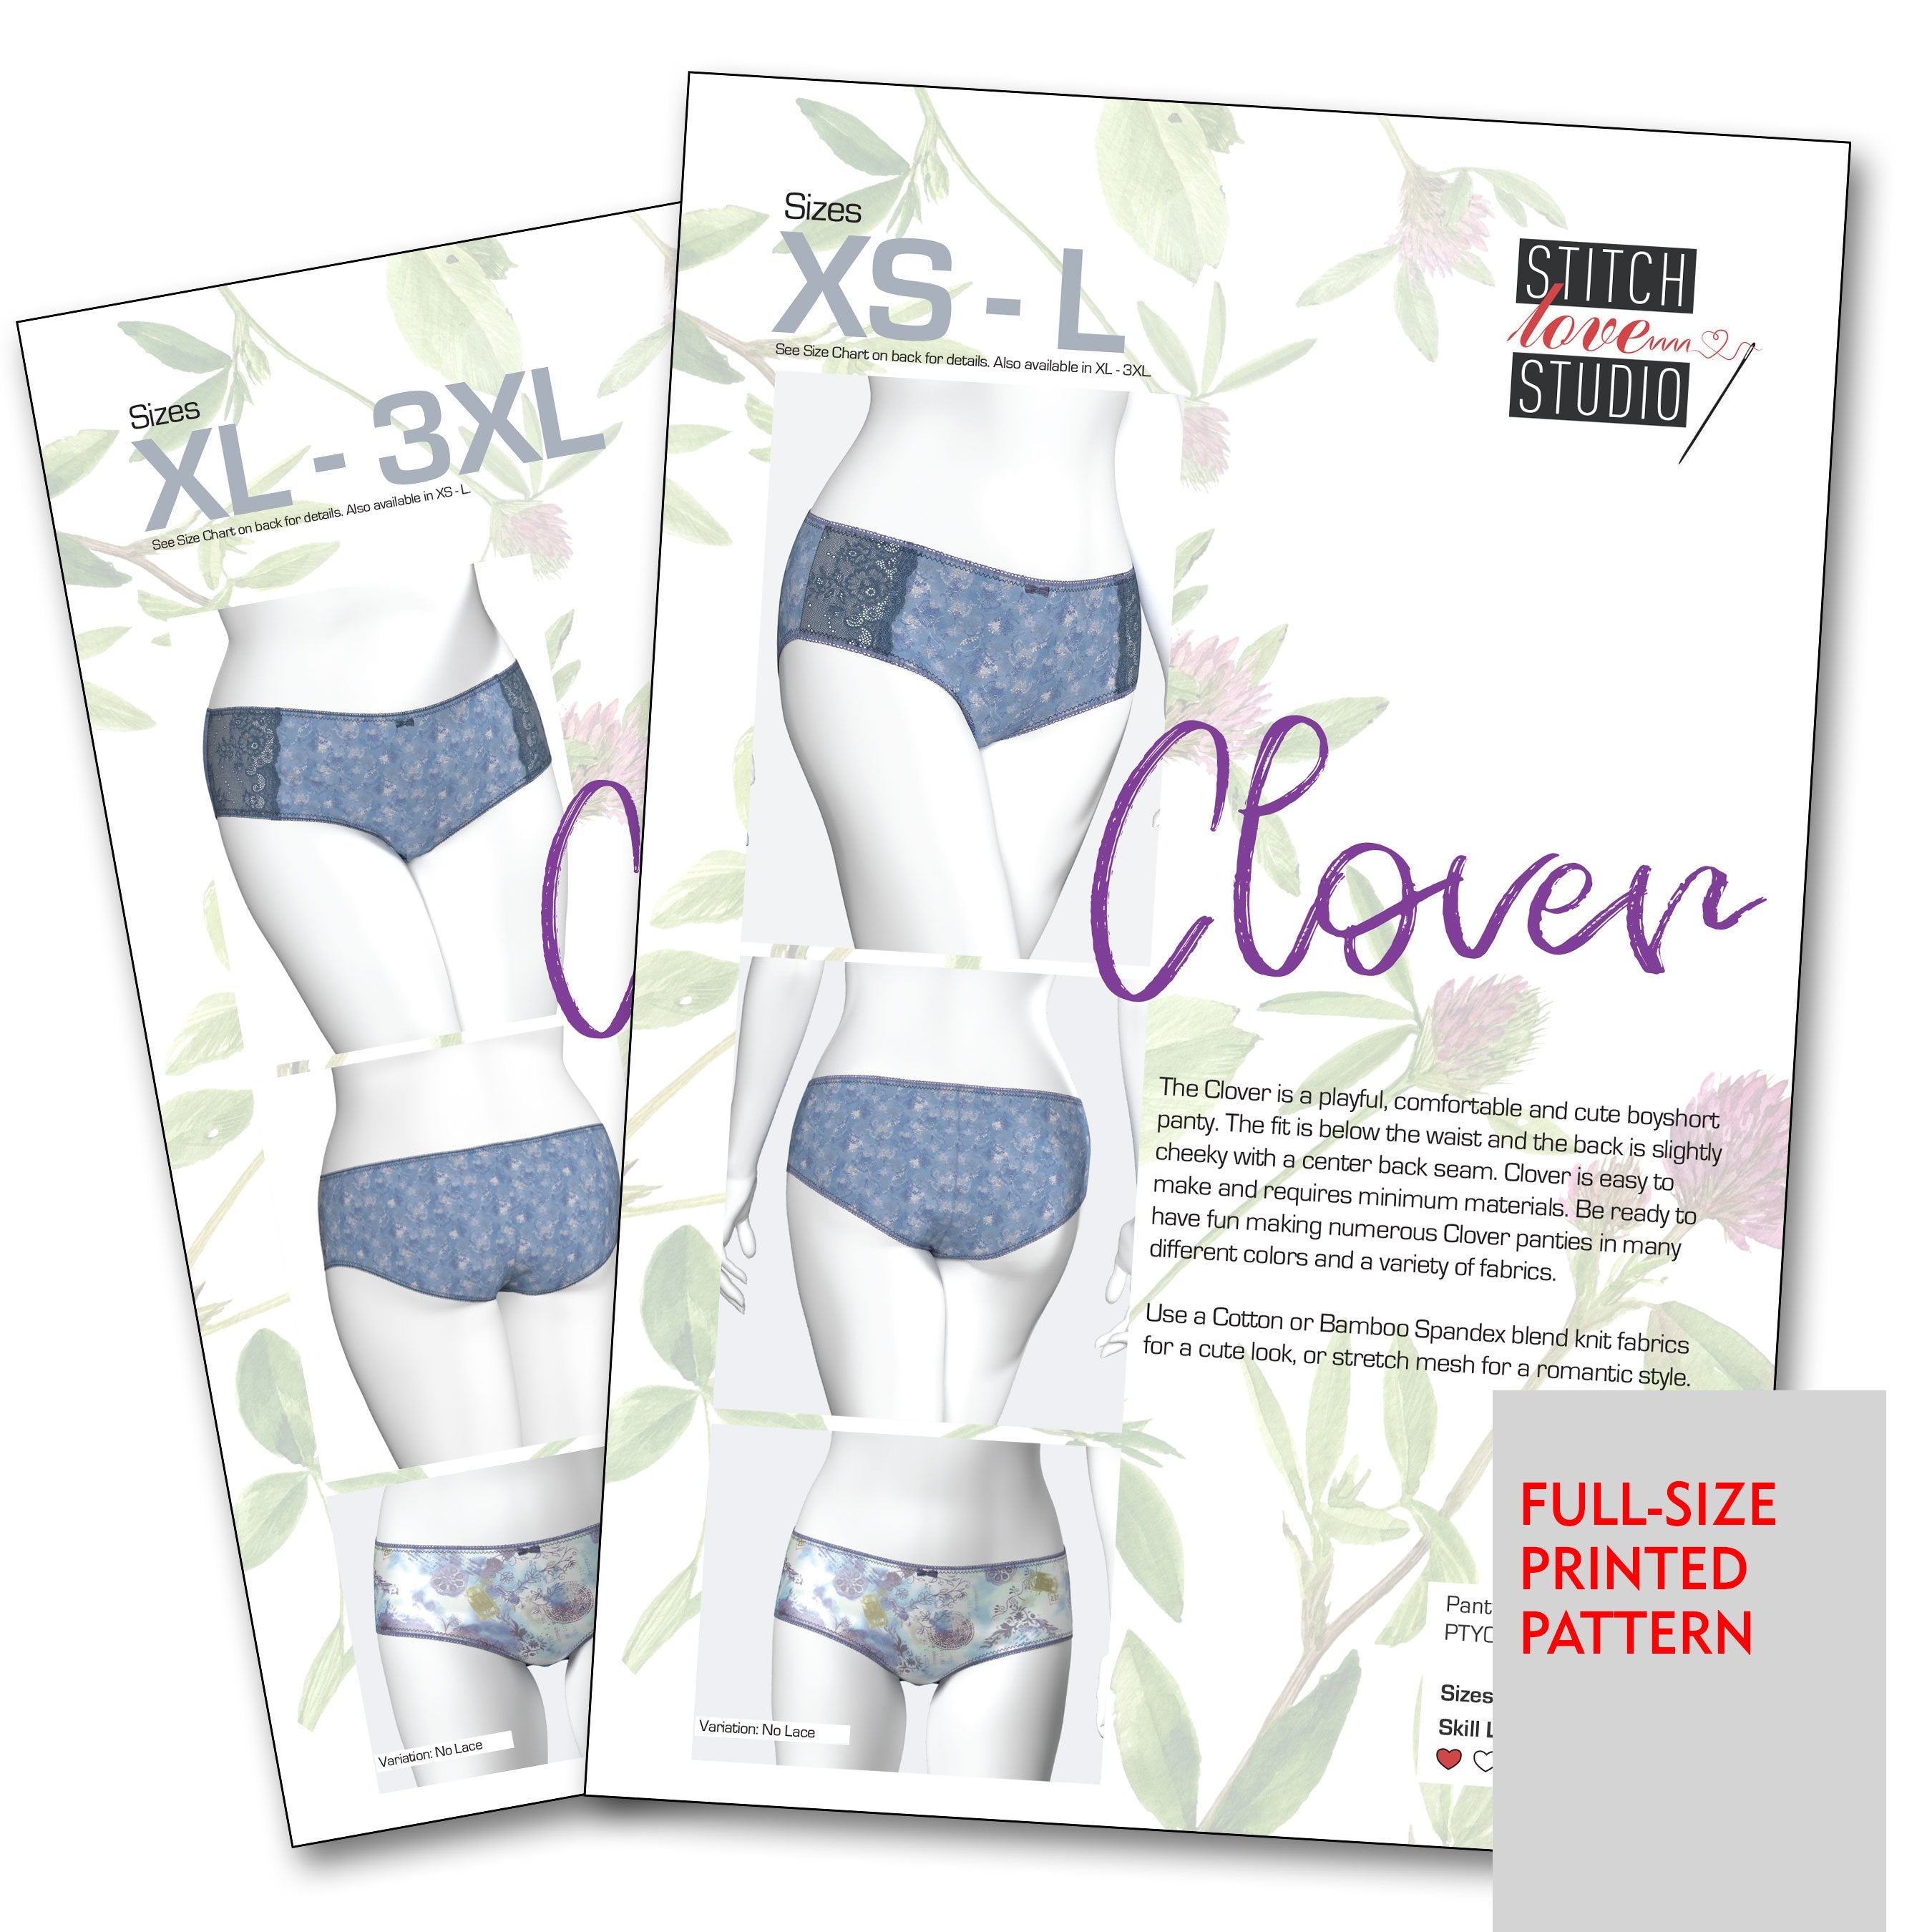 http://stitchlovestudio.com/cdn/shop/products/patterns-printed-clover-panty-sewing-pattern-sizes-xs-l-or-xl-3xl-1.jpg?v=1676838488